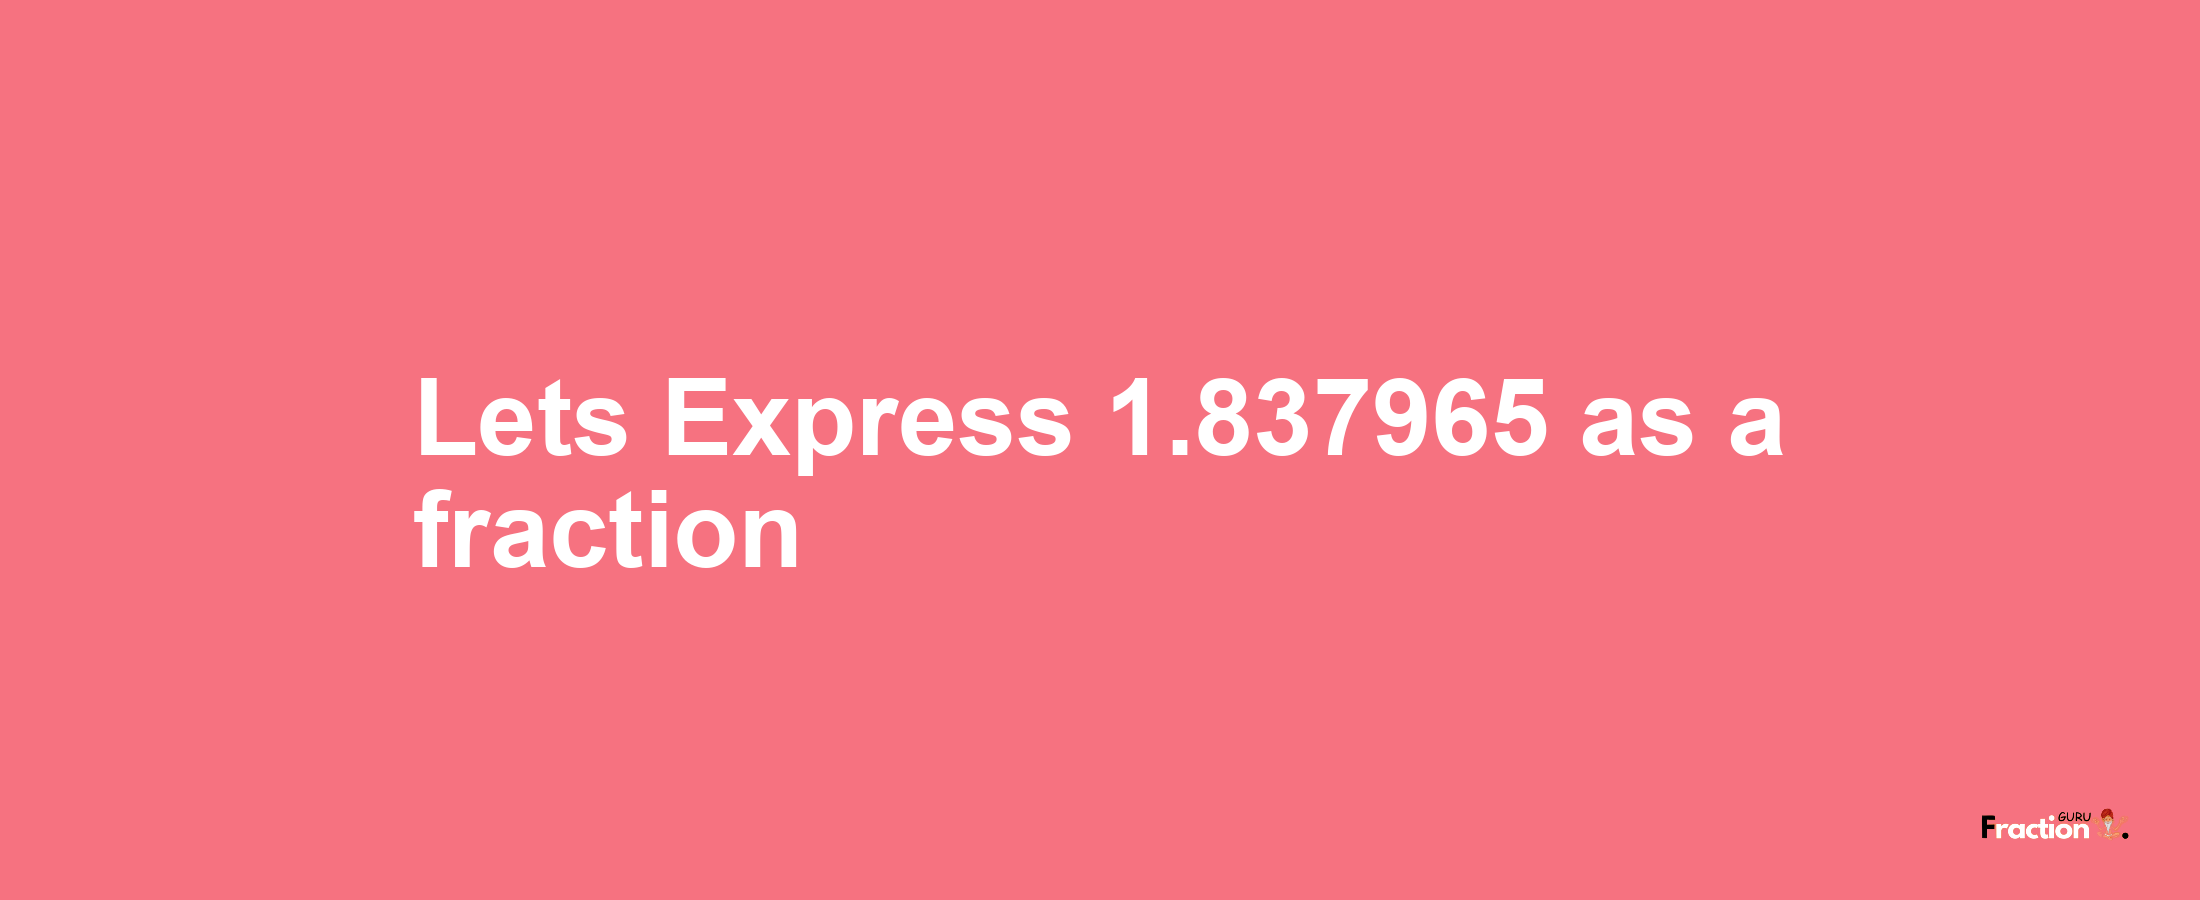 Lets Express 1.837965 as afraction